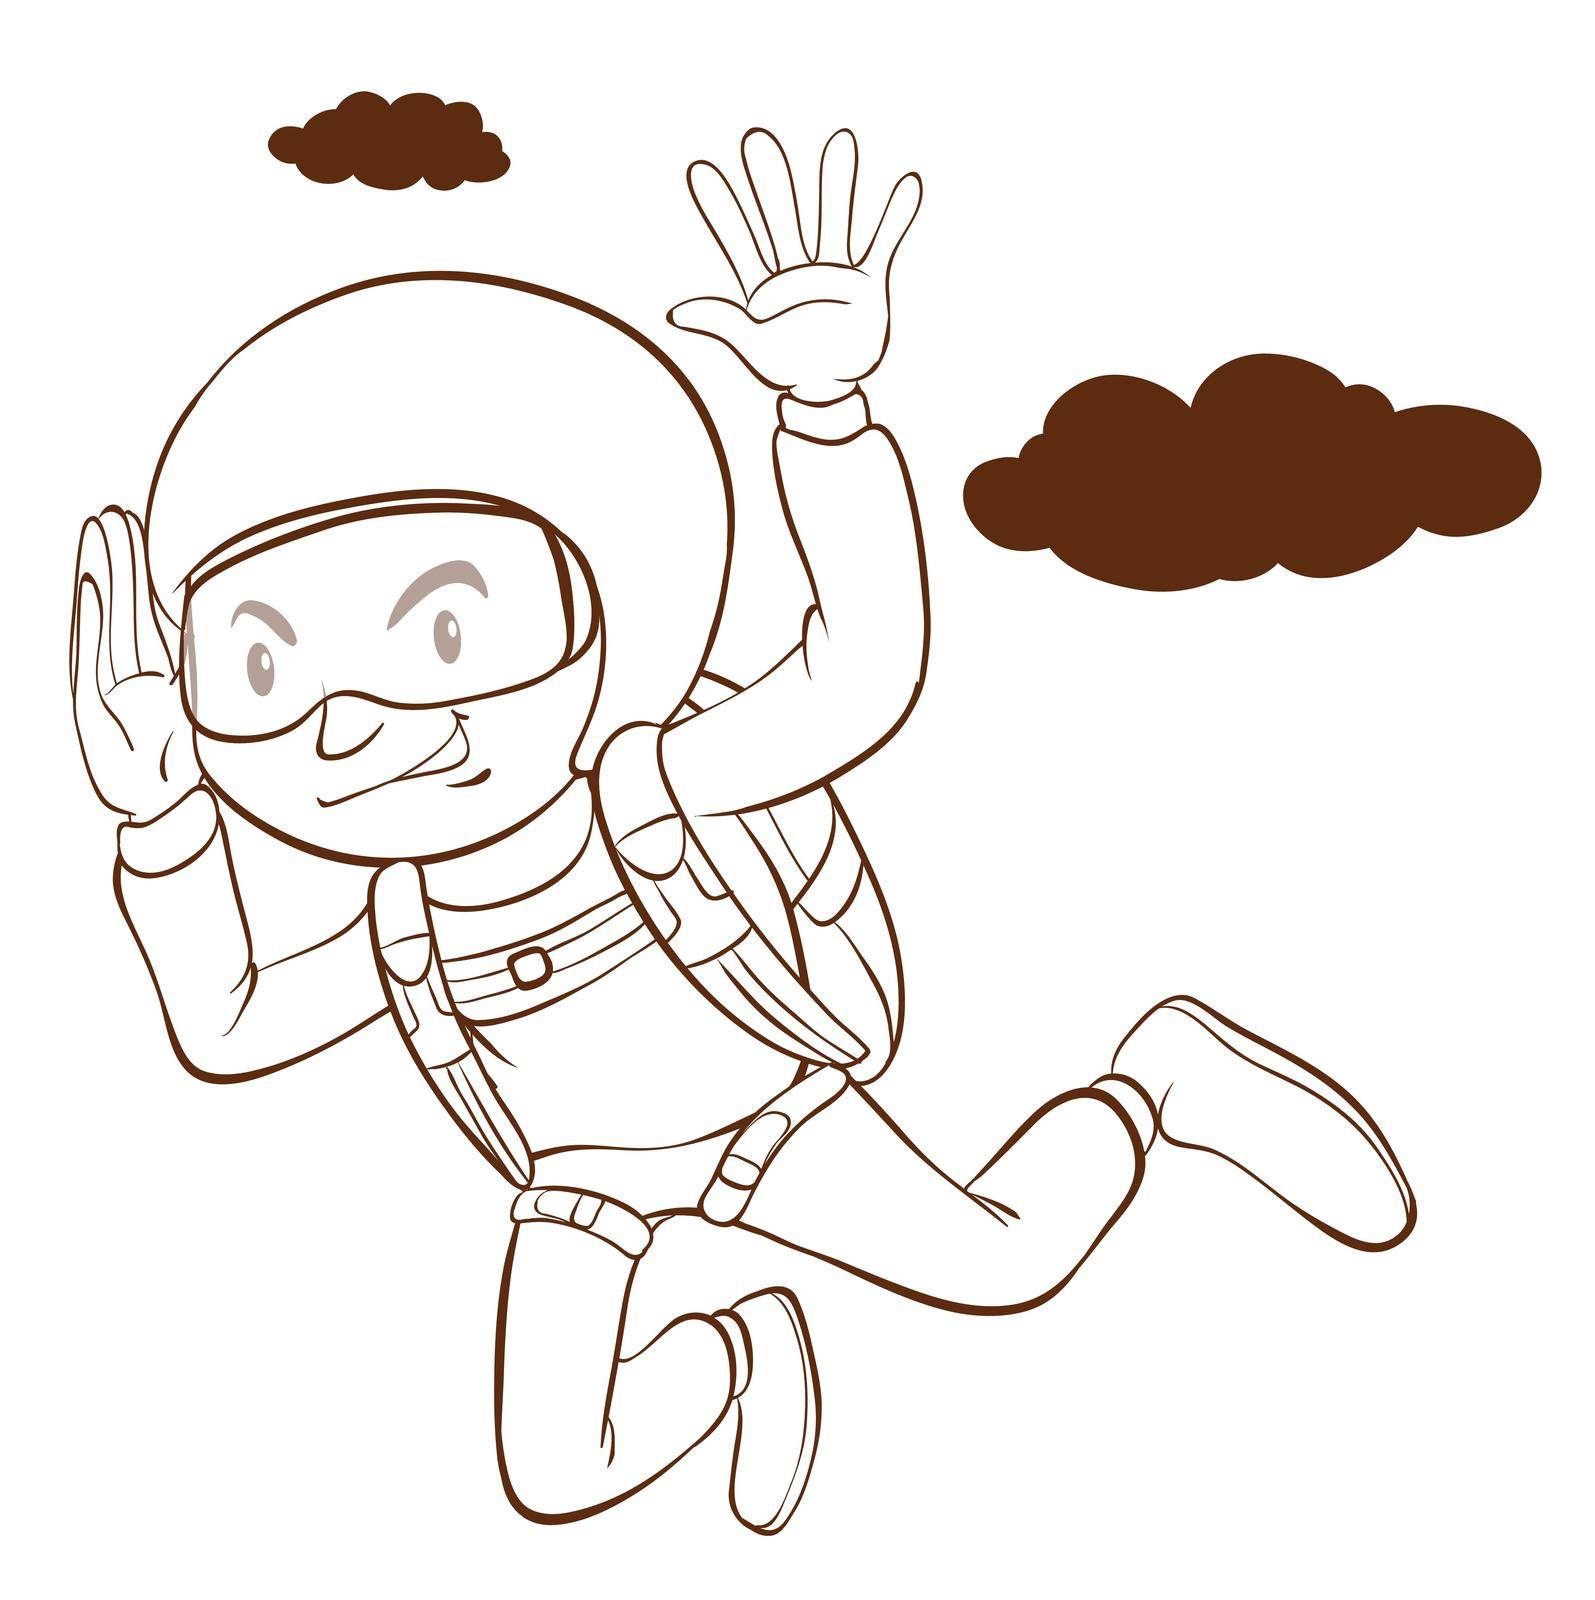 A plain drawing of a man skydiving on a white background